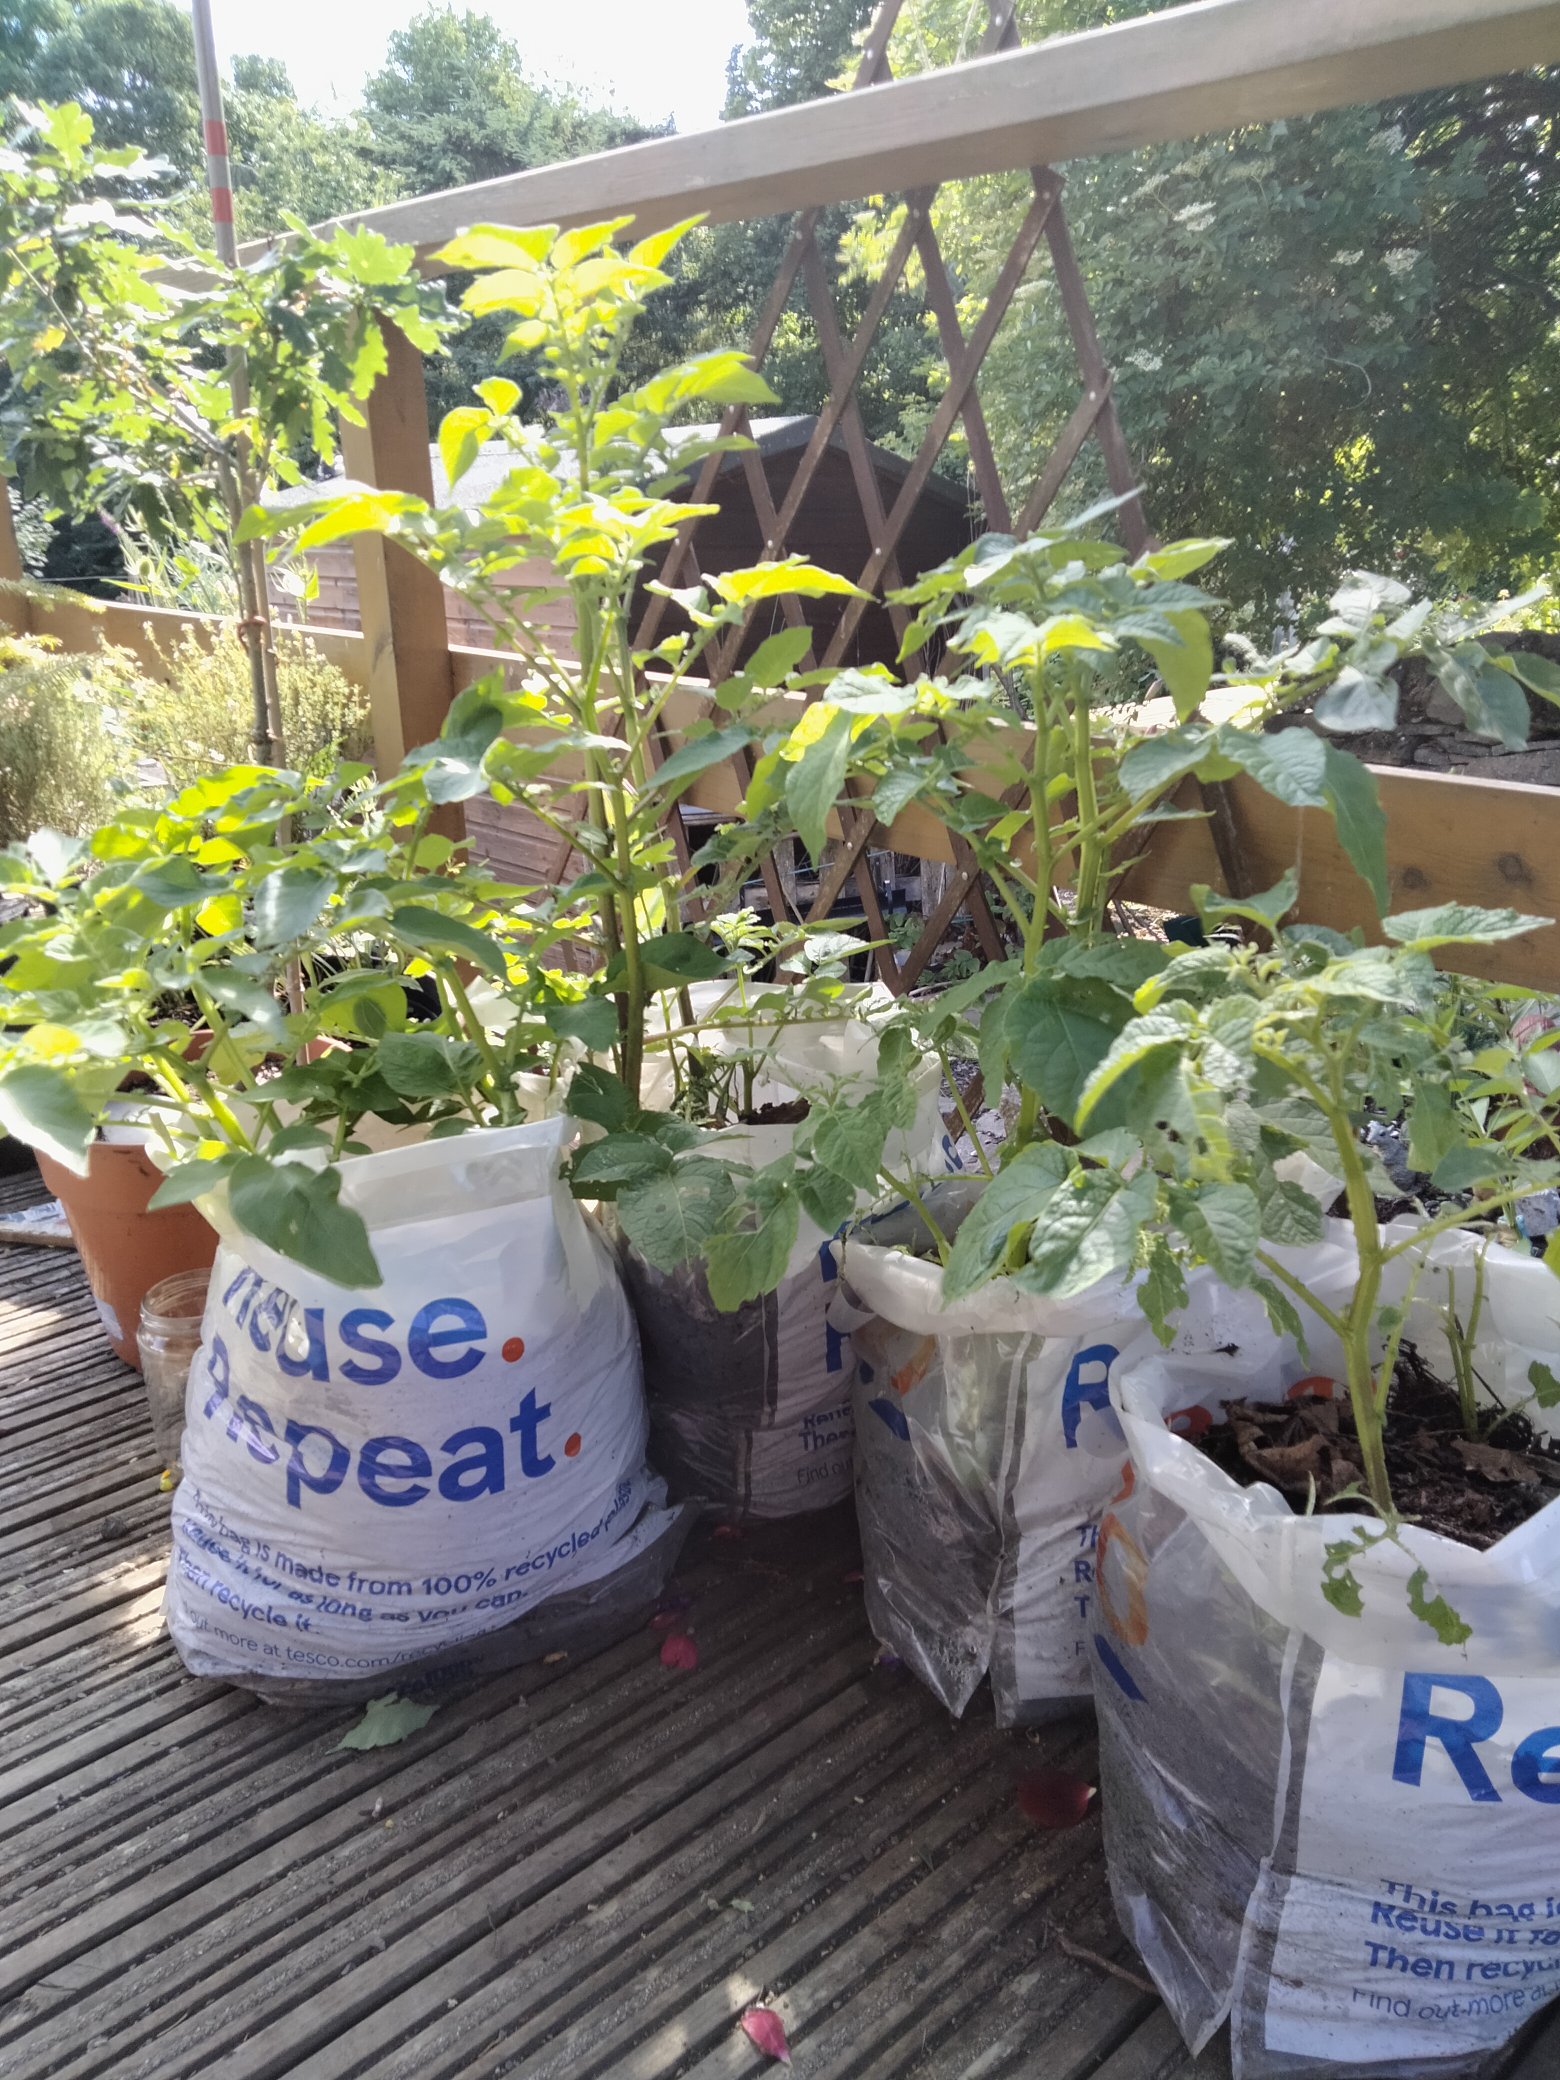 Ninewells Garden on Twitter: "Our Bag for Life potatoes are starting to take off. Don't forget to read our small space gardening blog for tips to green your own small space. 👇